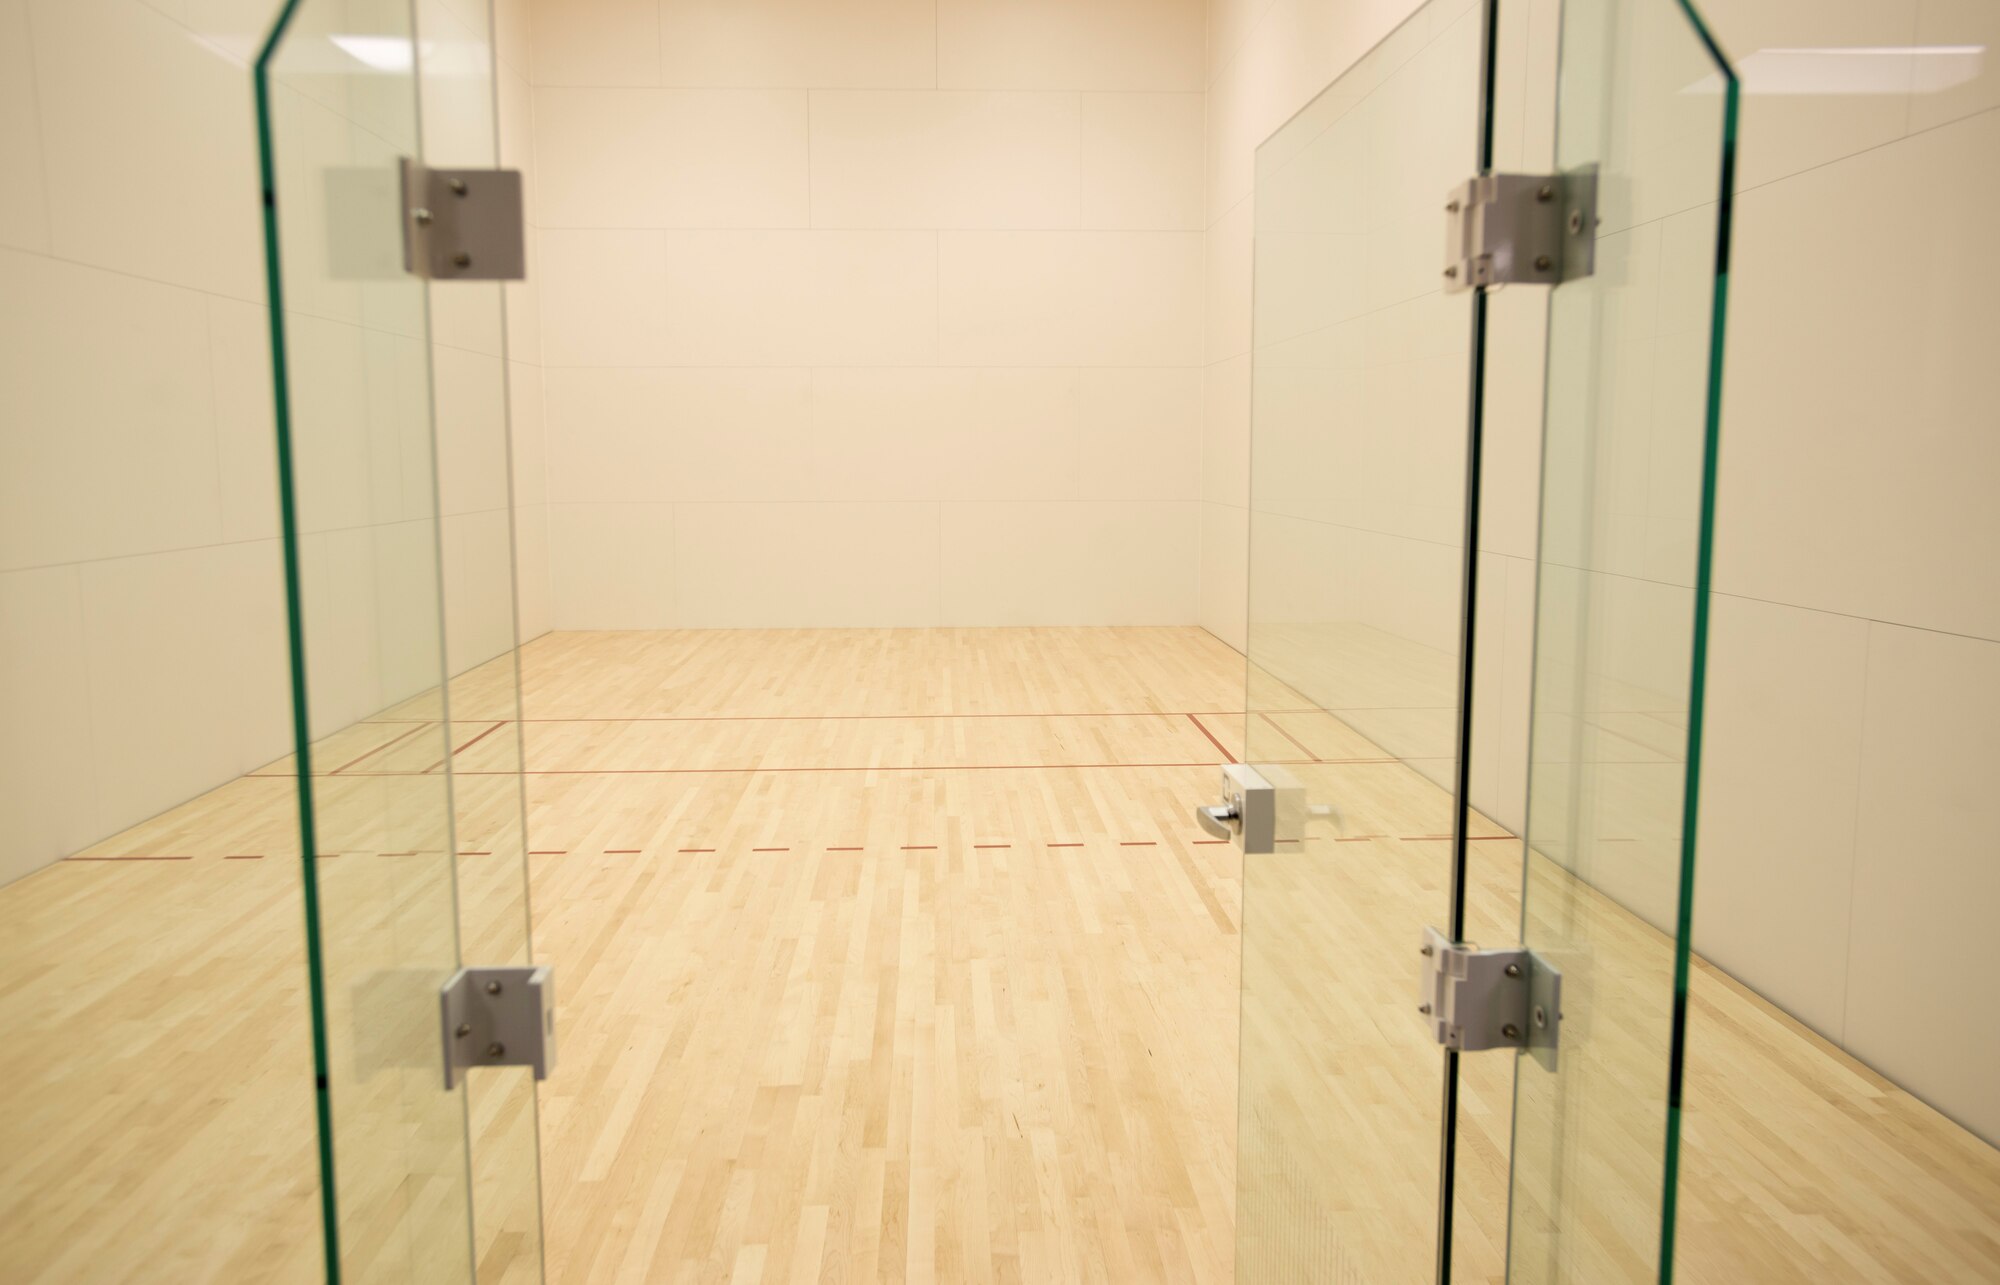 The 20th Force Support Squadron main fitness center new multi-room addition at Shaw Air Force Base, S.C., has four racquetball courts.